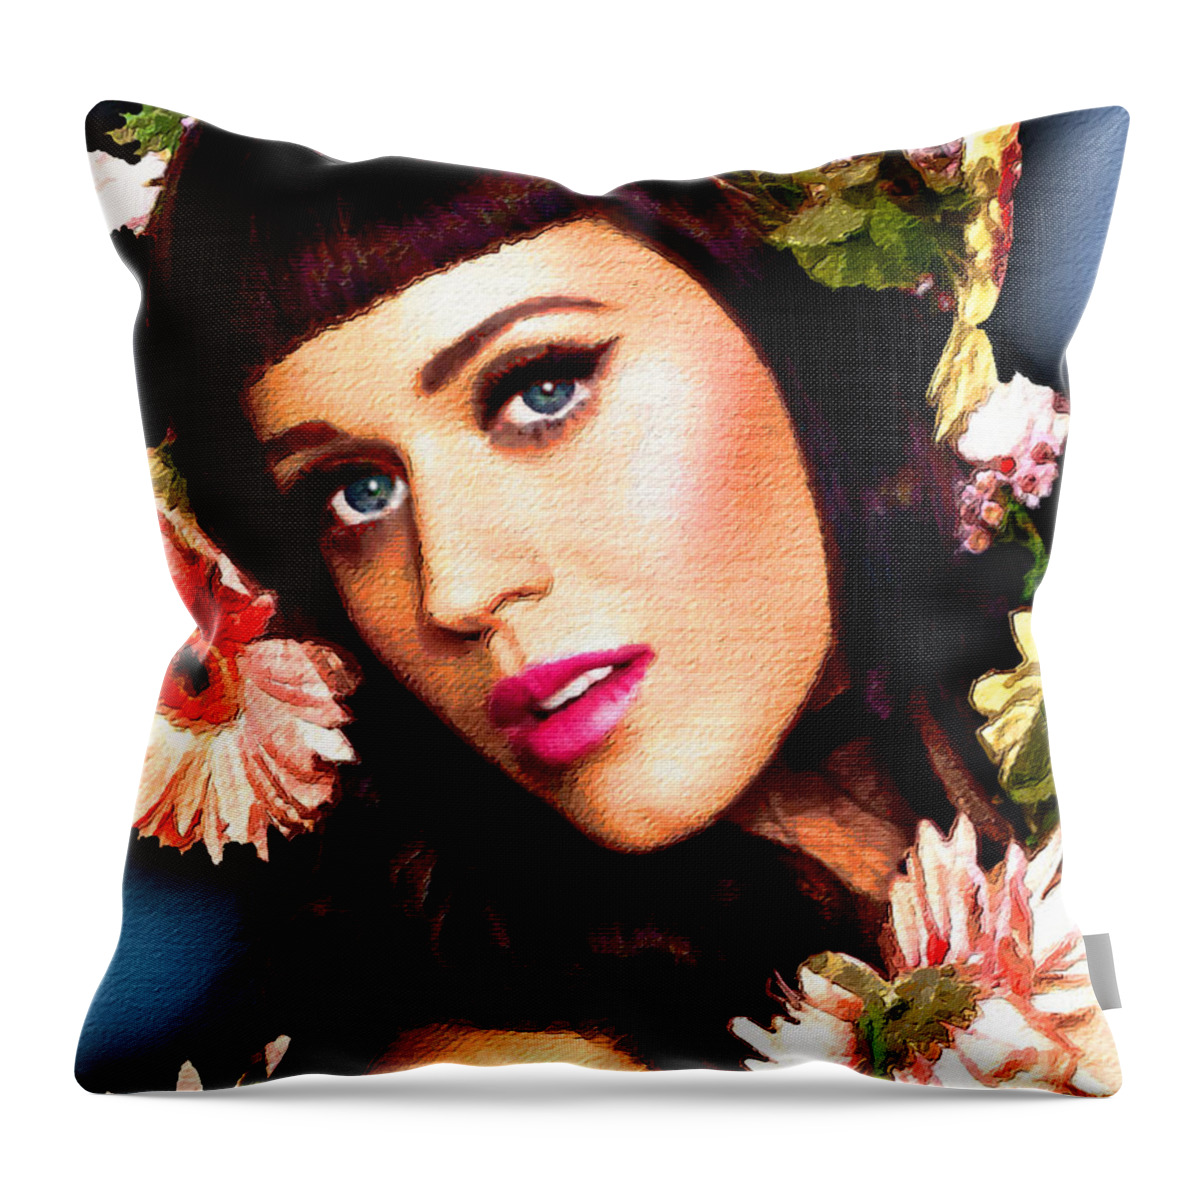 Katy Perry Throw Pillow featuring the painting Katy Perry by Tony Rubino